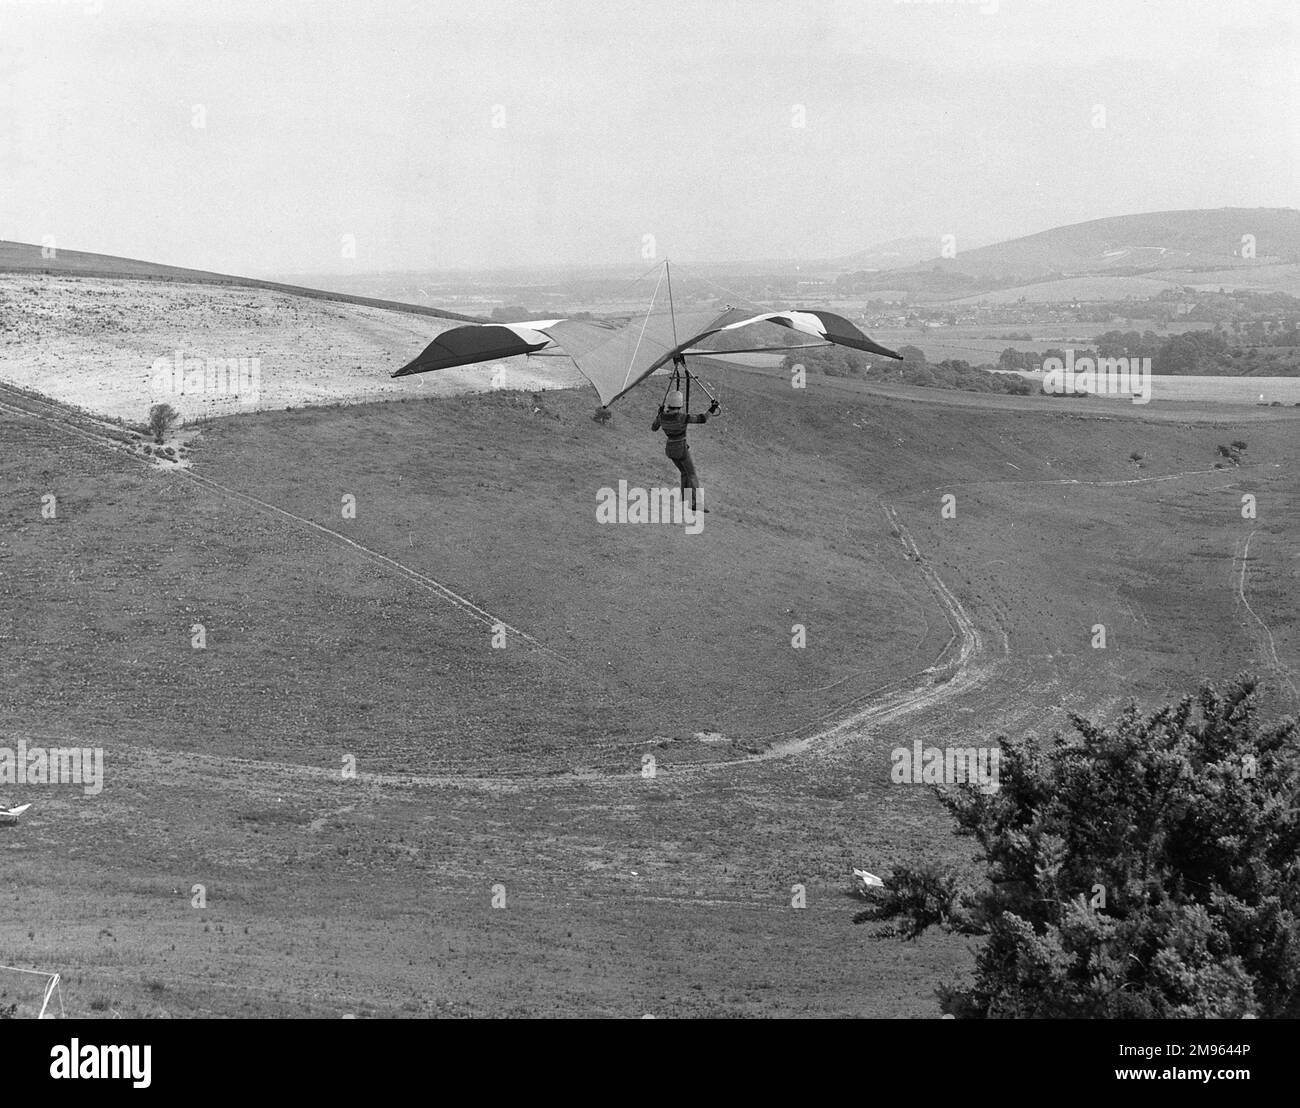 A hang glider enjoys the view above Steyning Bowl, Sussex, England. Stock Photo